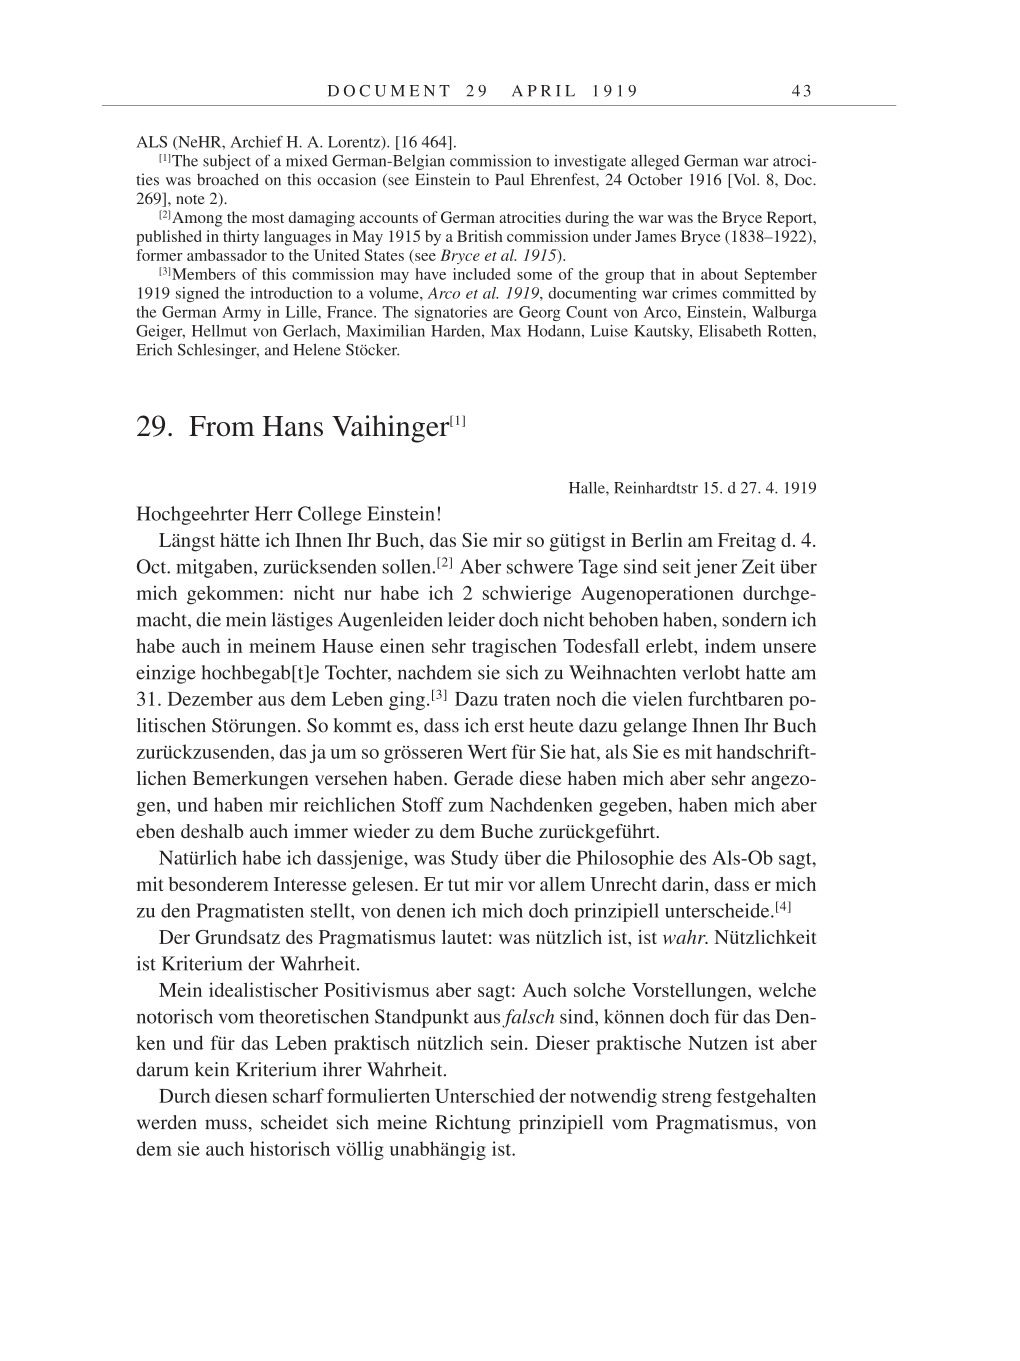 Volume 9: The Berlin Years: Correspondence January 1919-April 1920 page 43